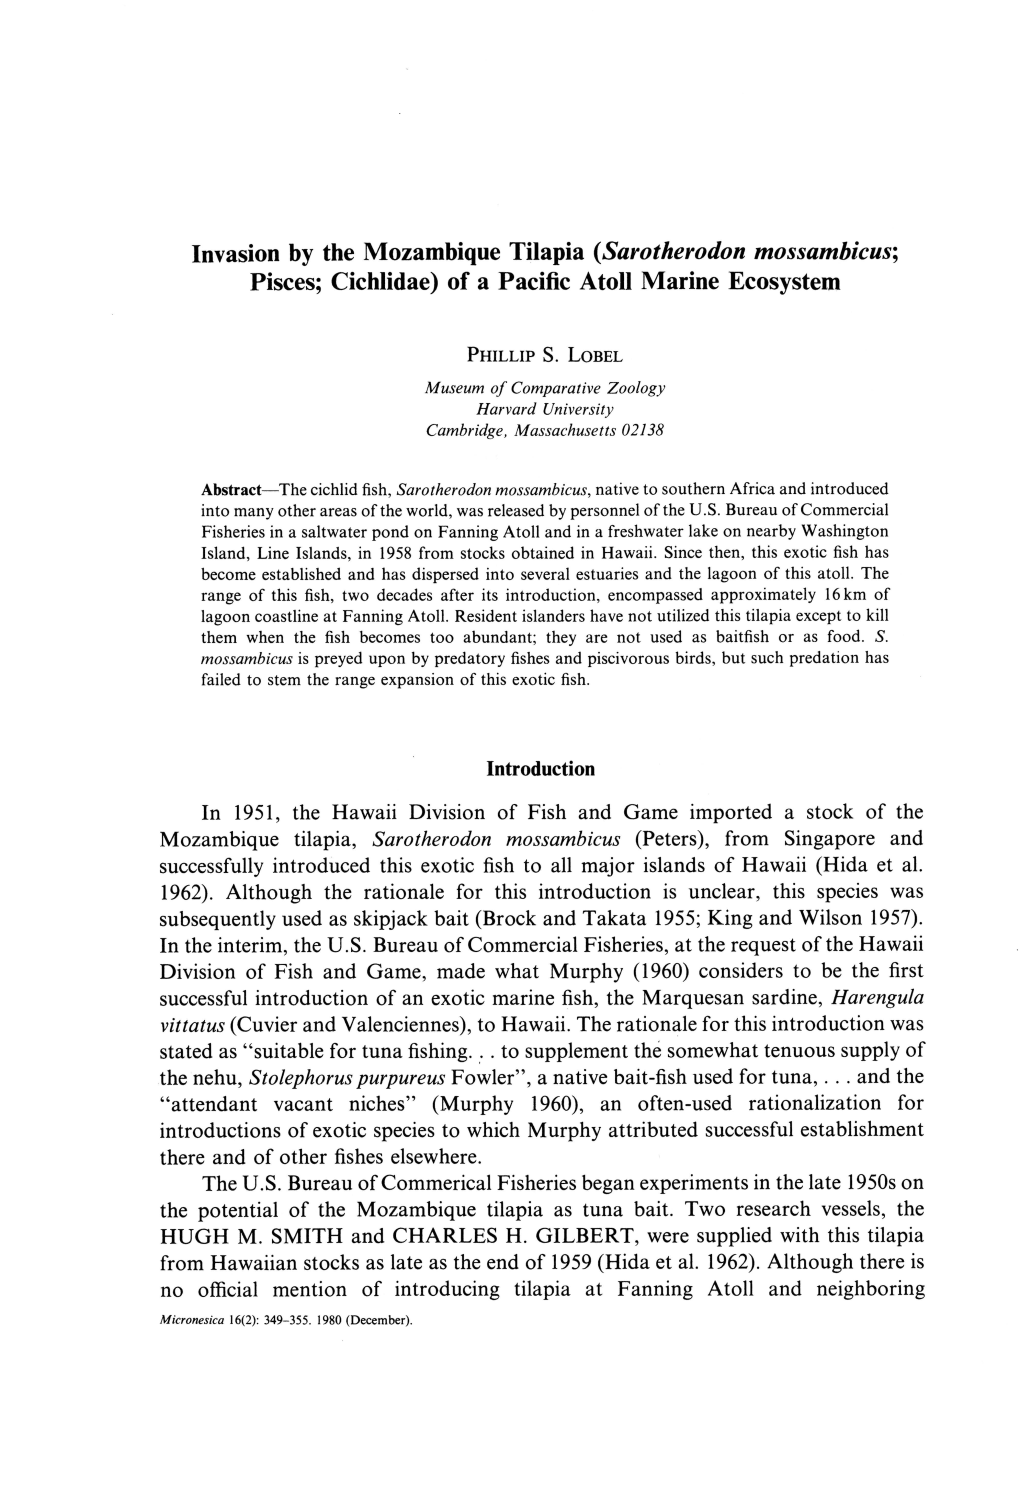 Invasion by the Mozambique Tilapia (Sarotherodon Mossambicus; Pisces; Cichlidae) of a Pacific Atoll Marine Ecosystem